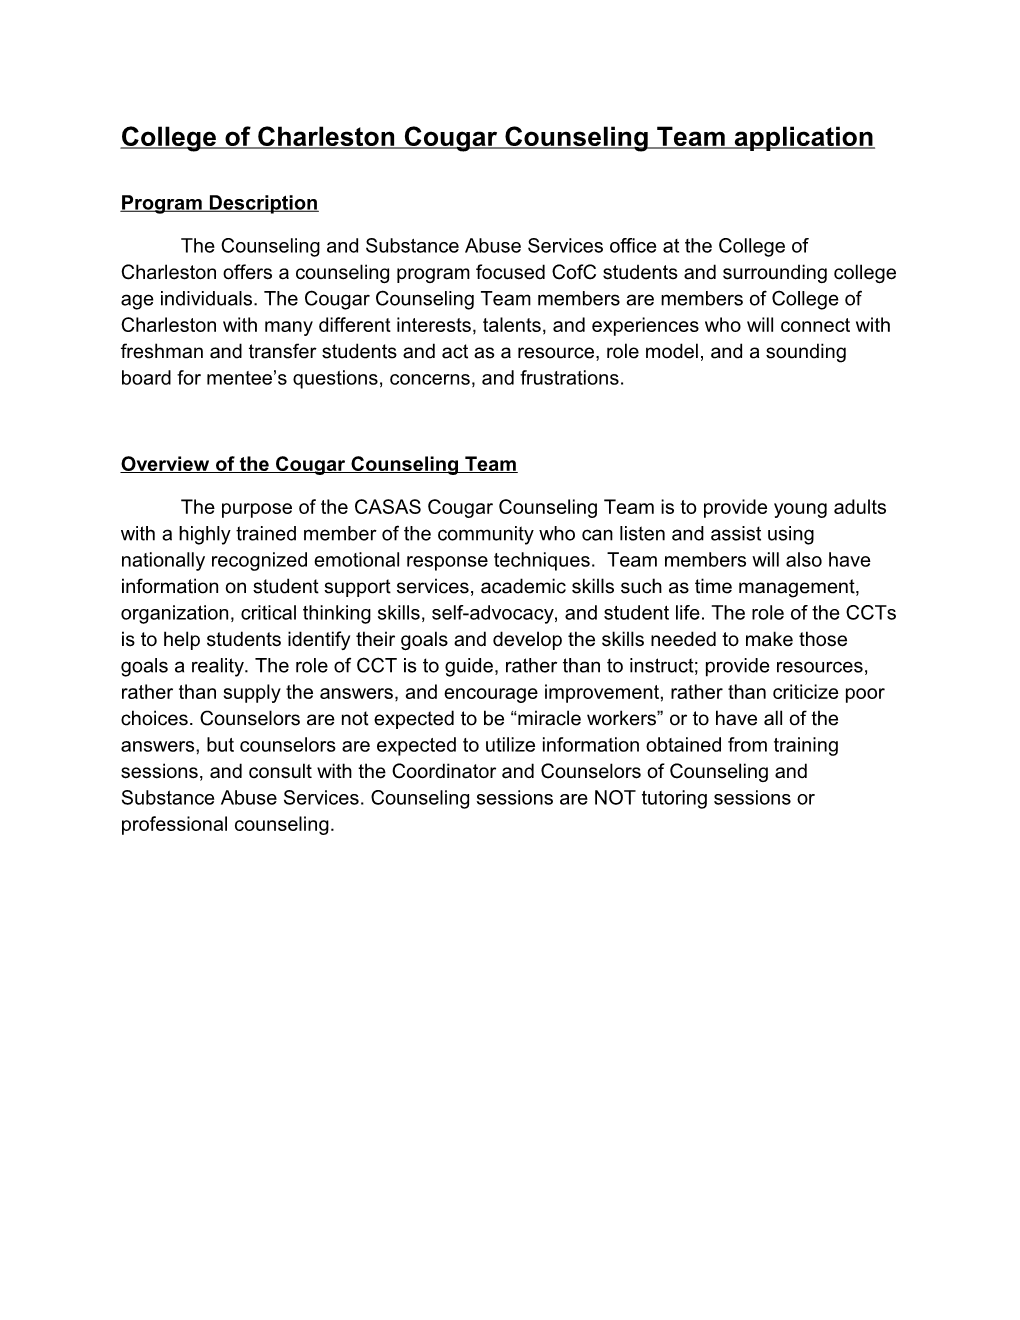 College of Charleston Peer Counselor Application